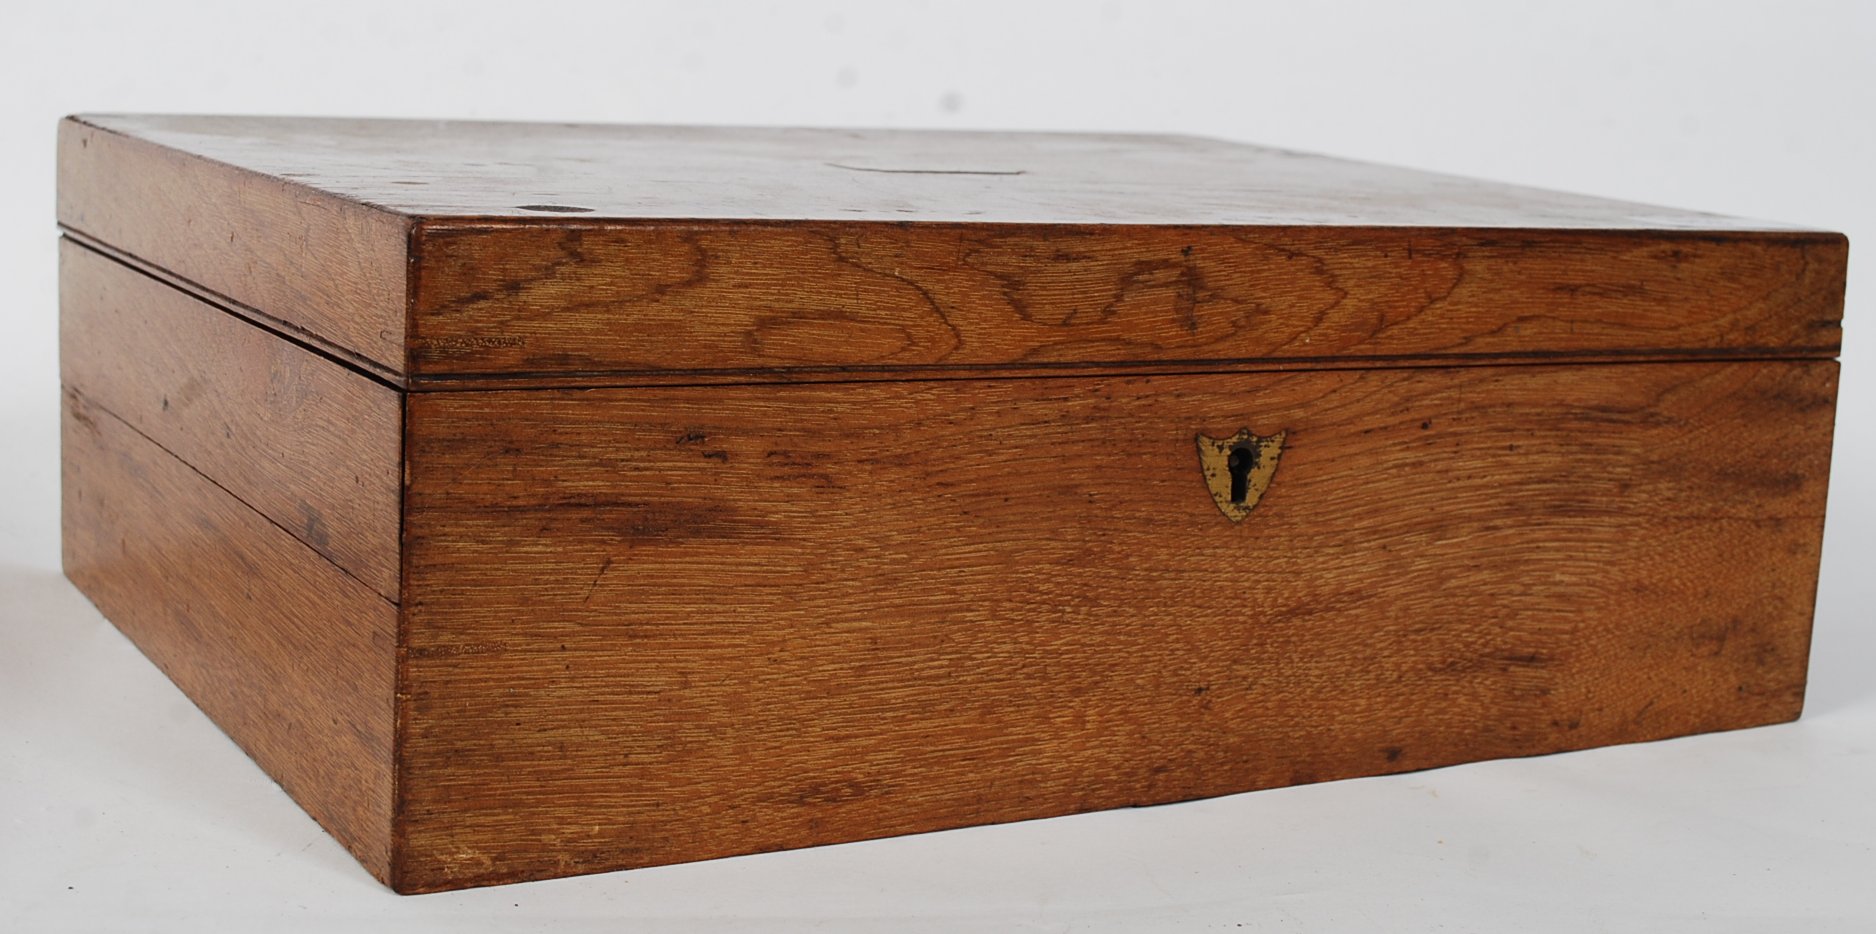 An Edwardian mahogany metamorphic cased sewing box. With contents to the interior having slide out